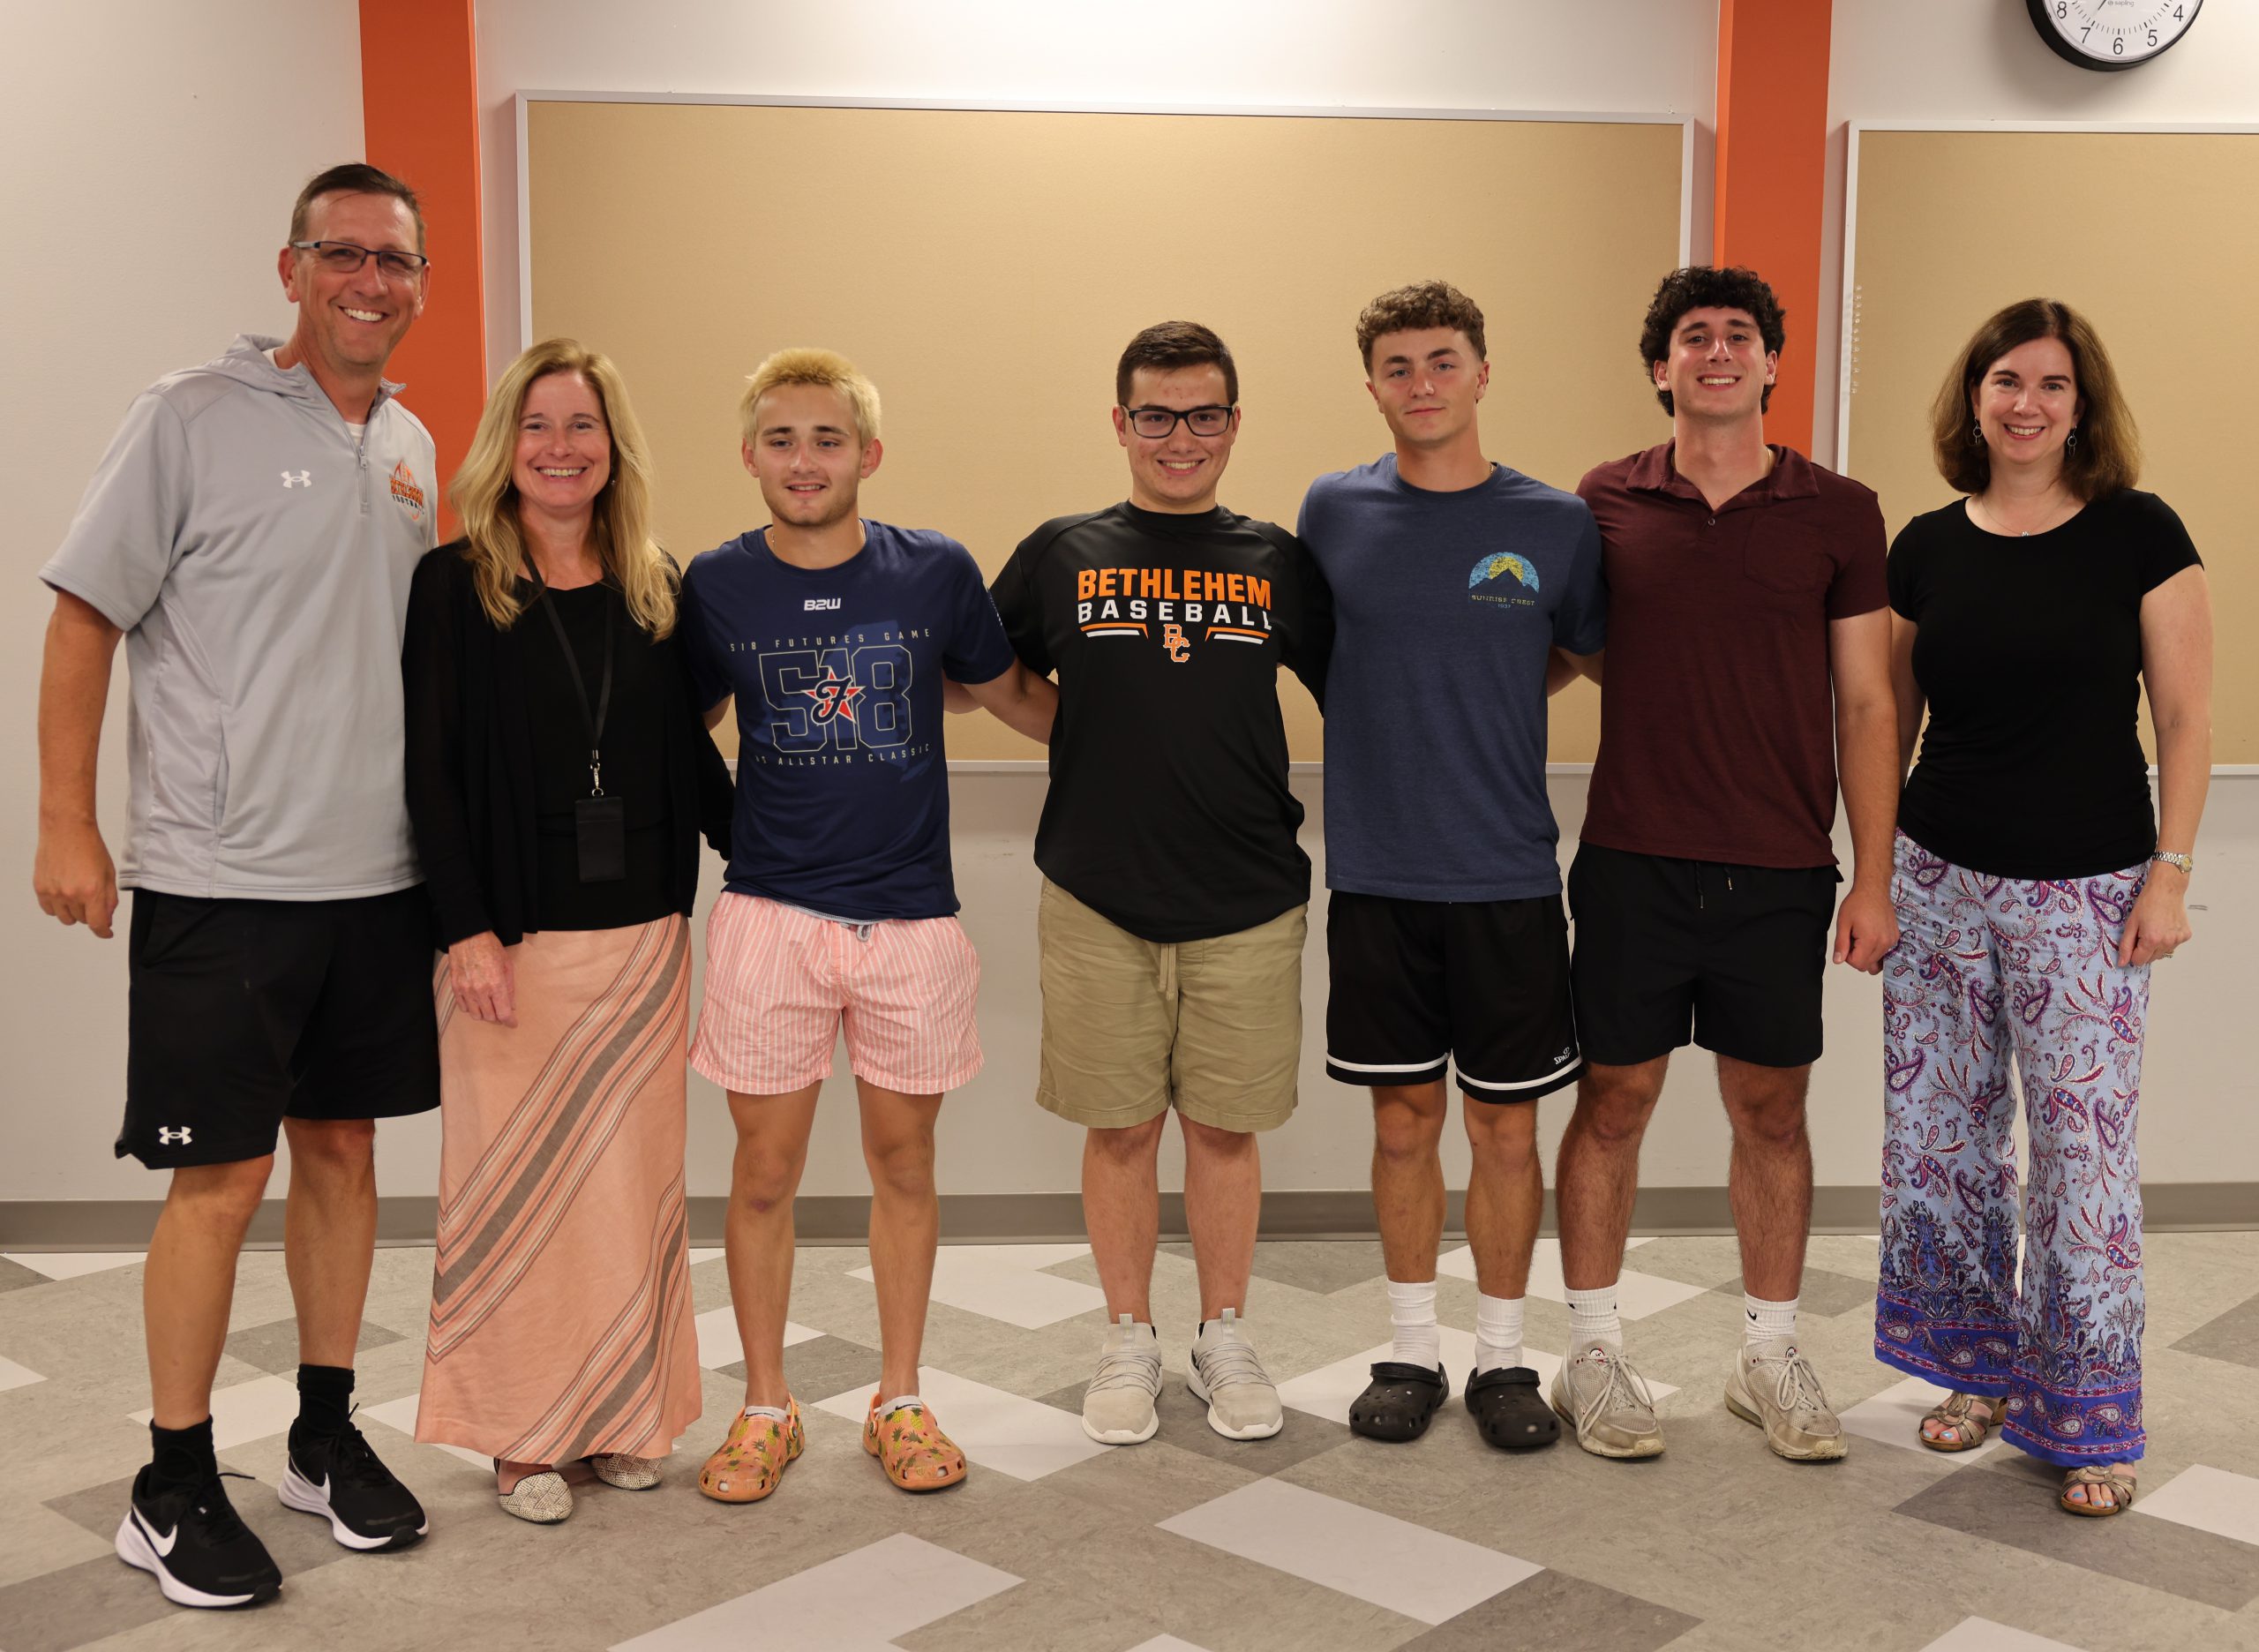 Superintendent Jody Monroe and Board President Holly Dellenbaugh pictured with members of the BC boys baseball team and Coach Rick Leach.